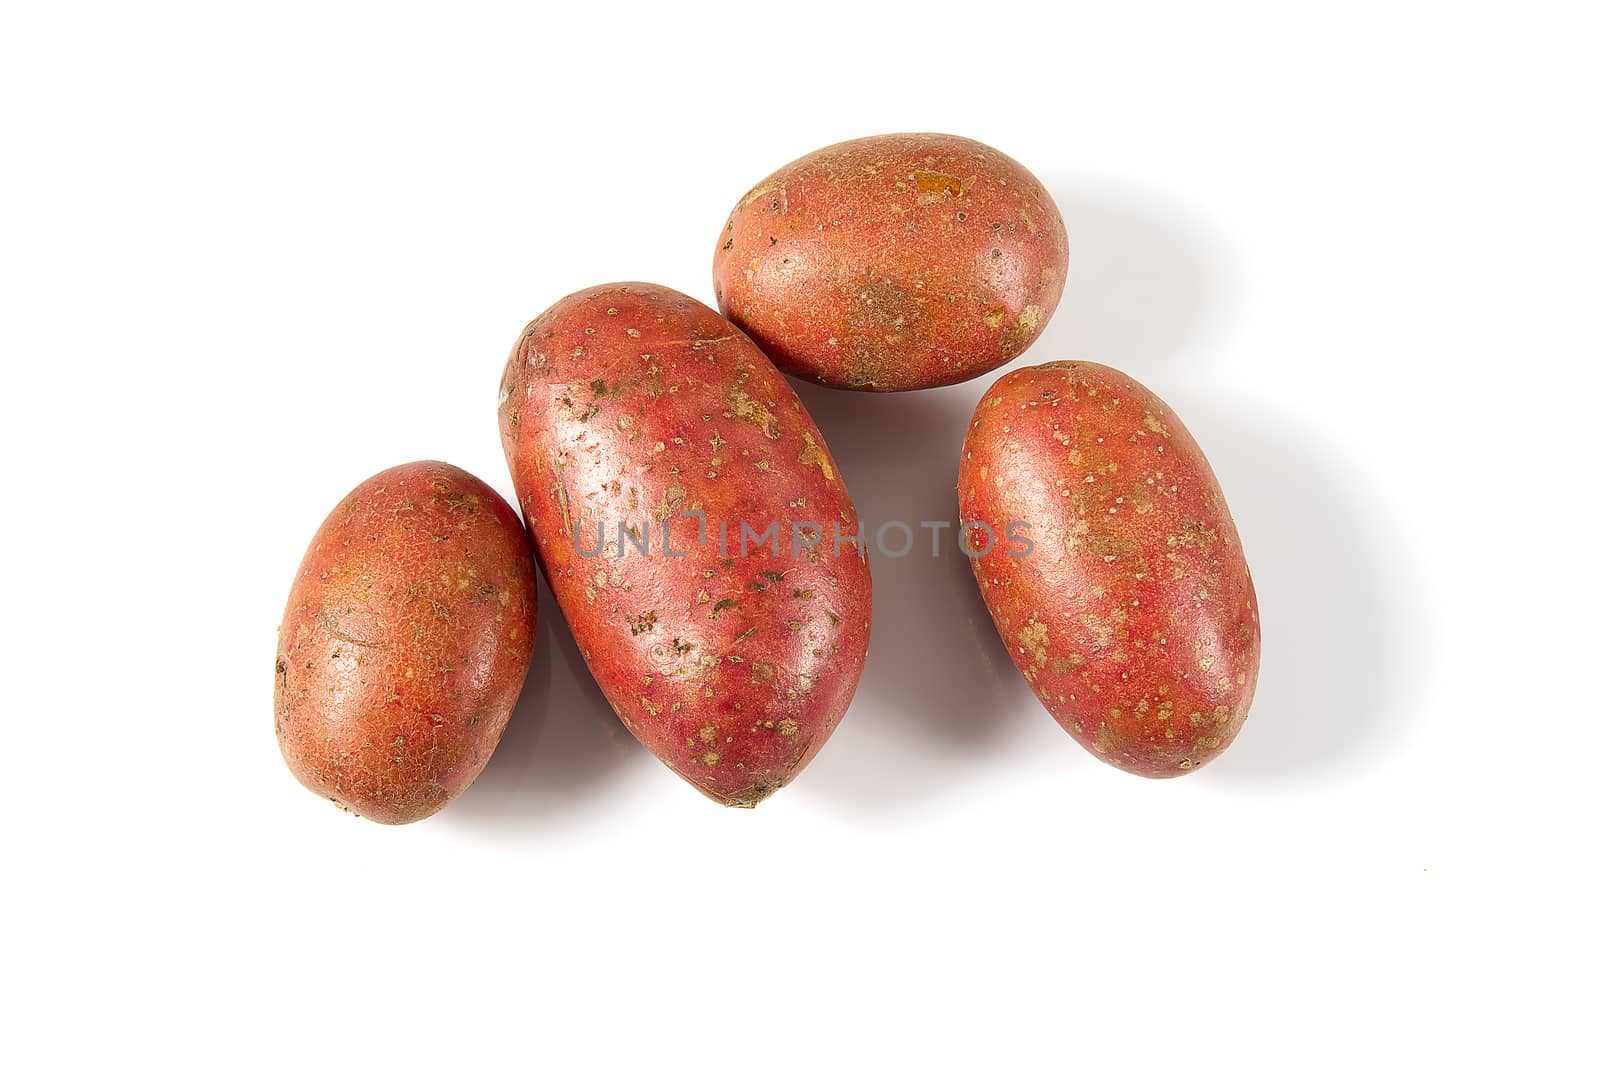 Raw red potato isolated on white background. top view. Pile of red potatoes isolated on white background. by PhotoTime